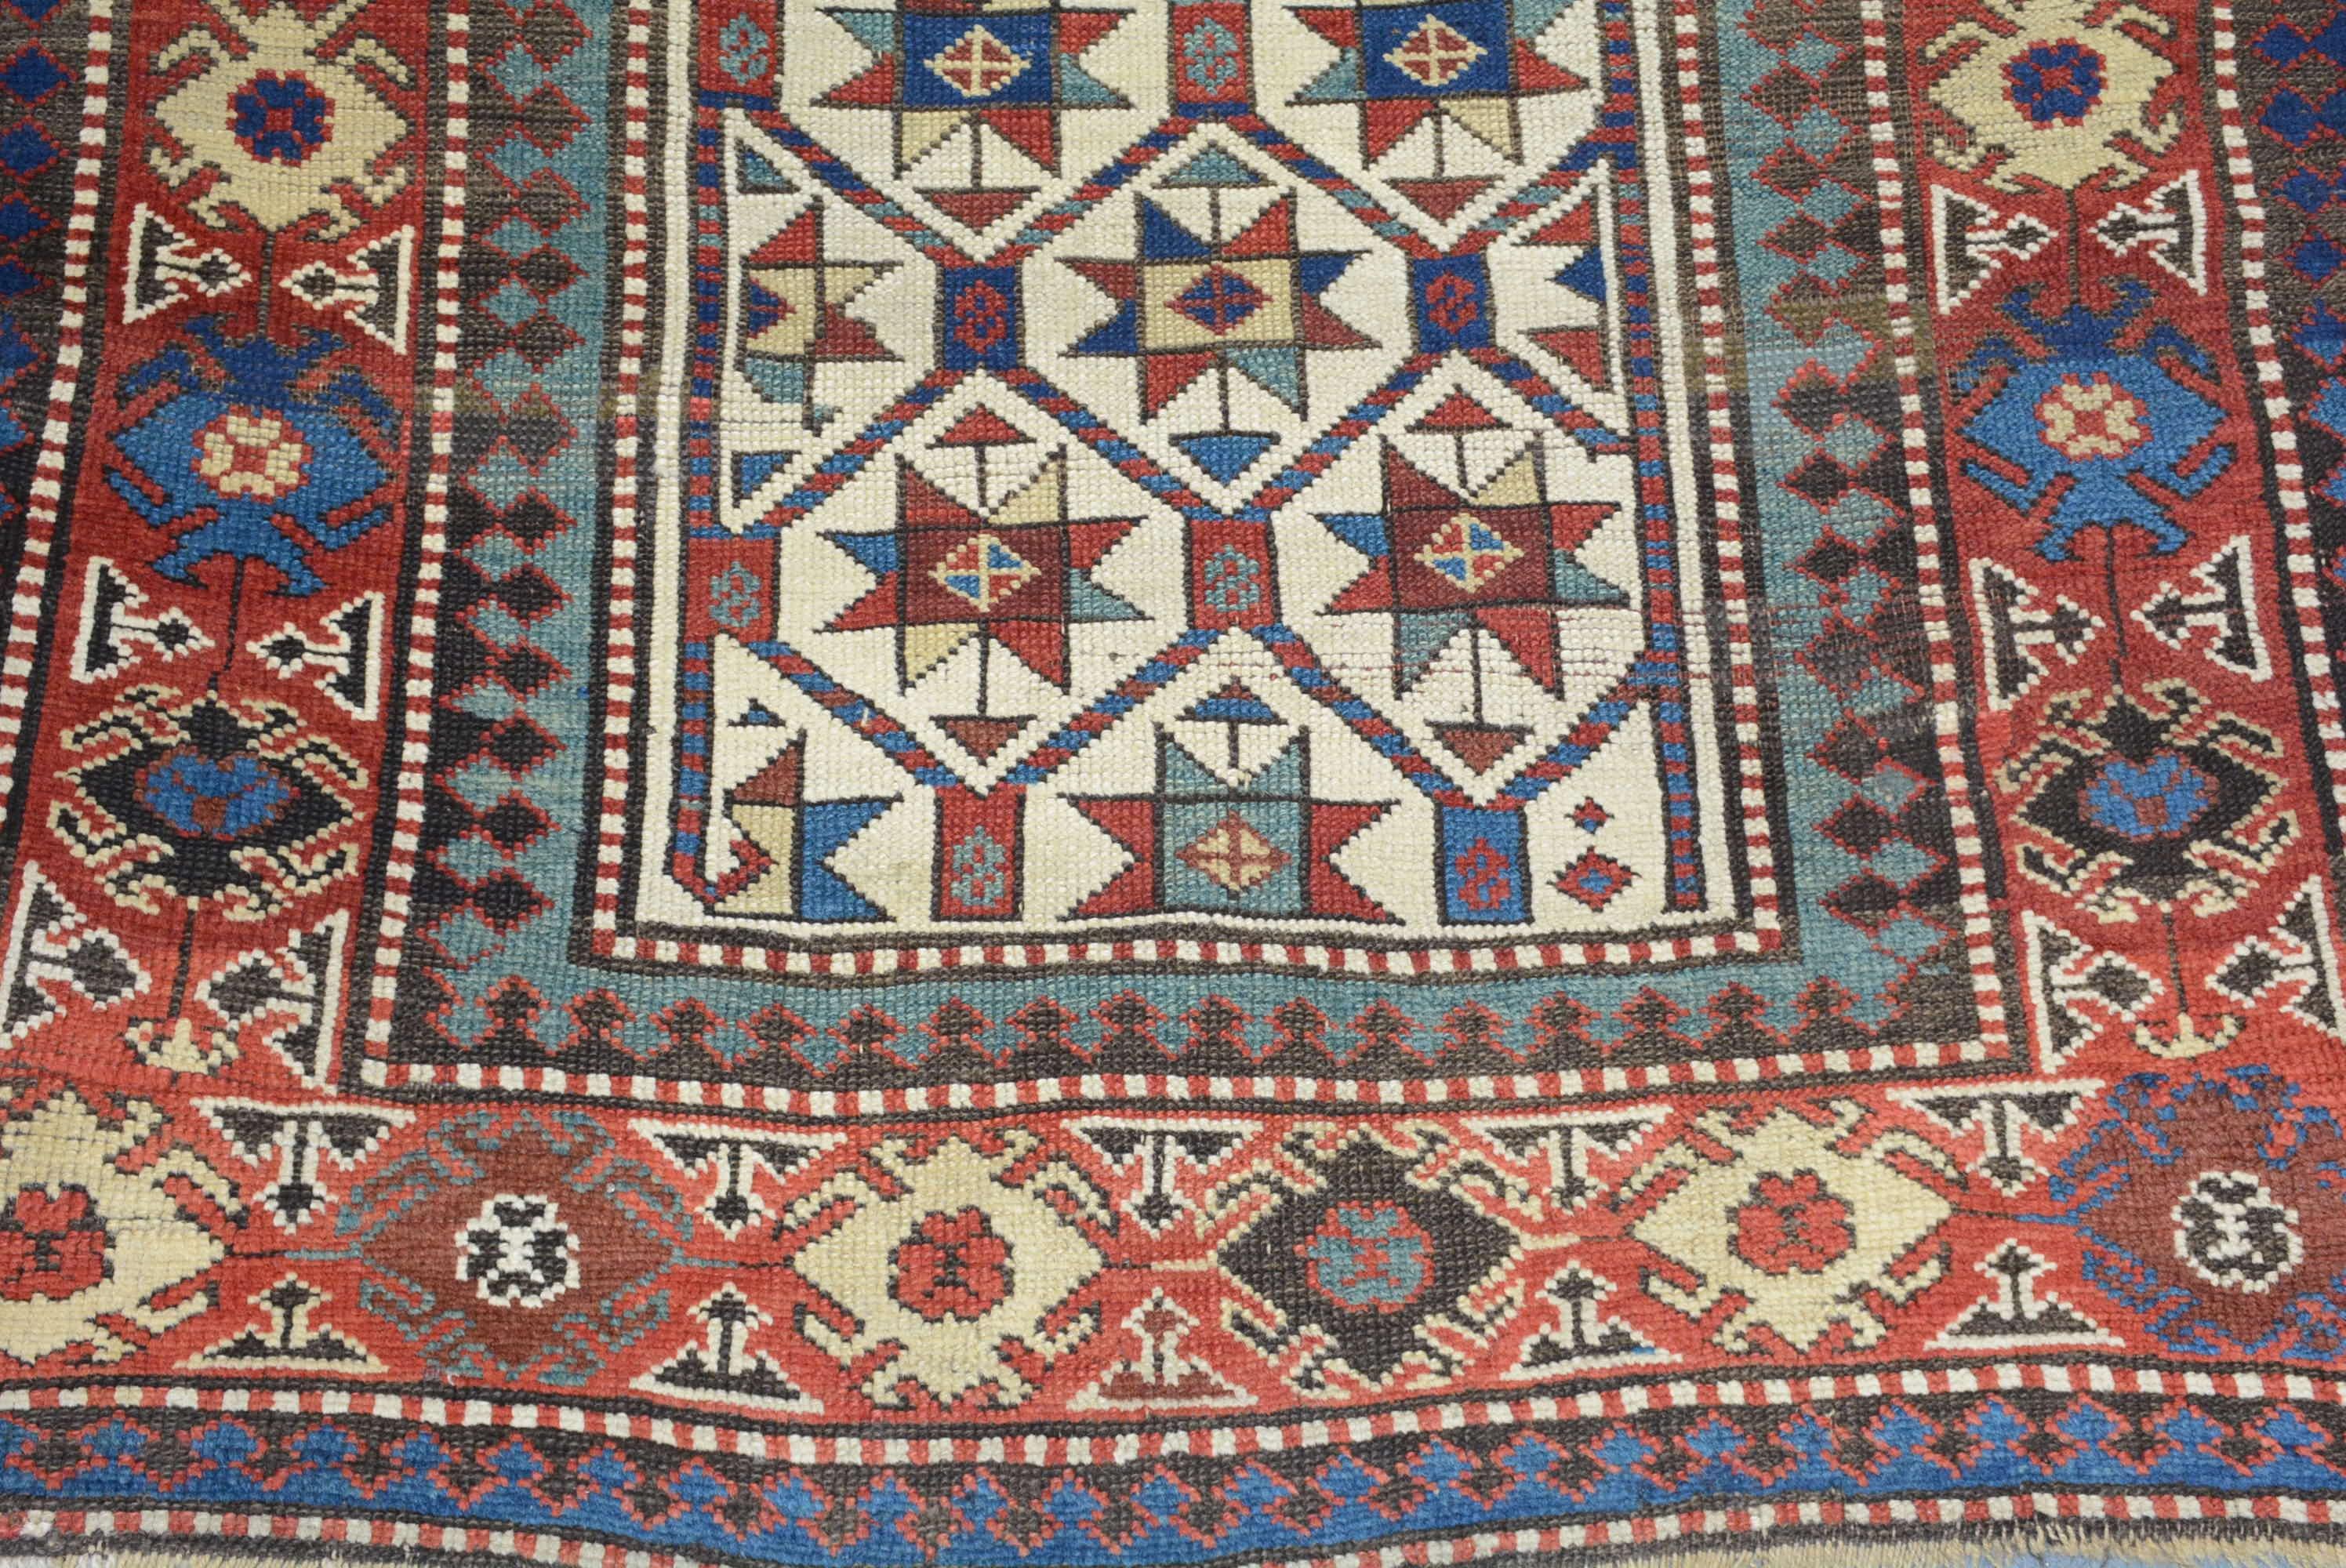 Late 19th Century Caucasian Kazak Rug In Good Condition For Sale In Closter, NJ